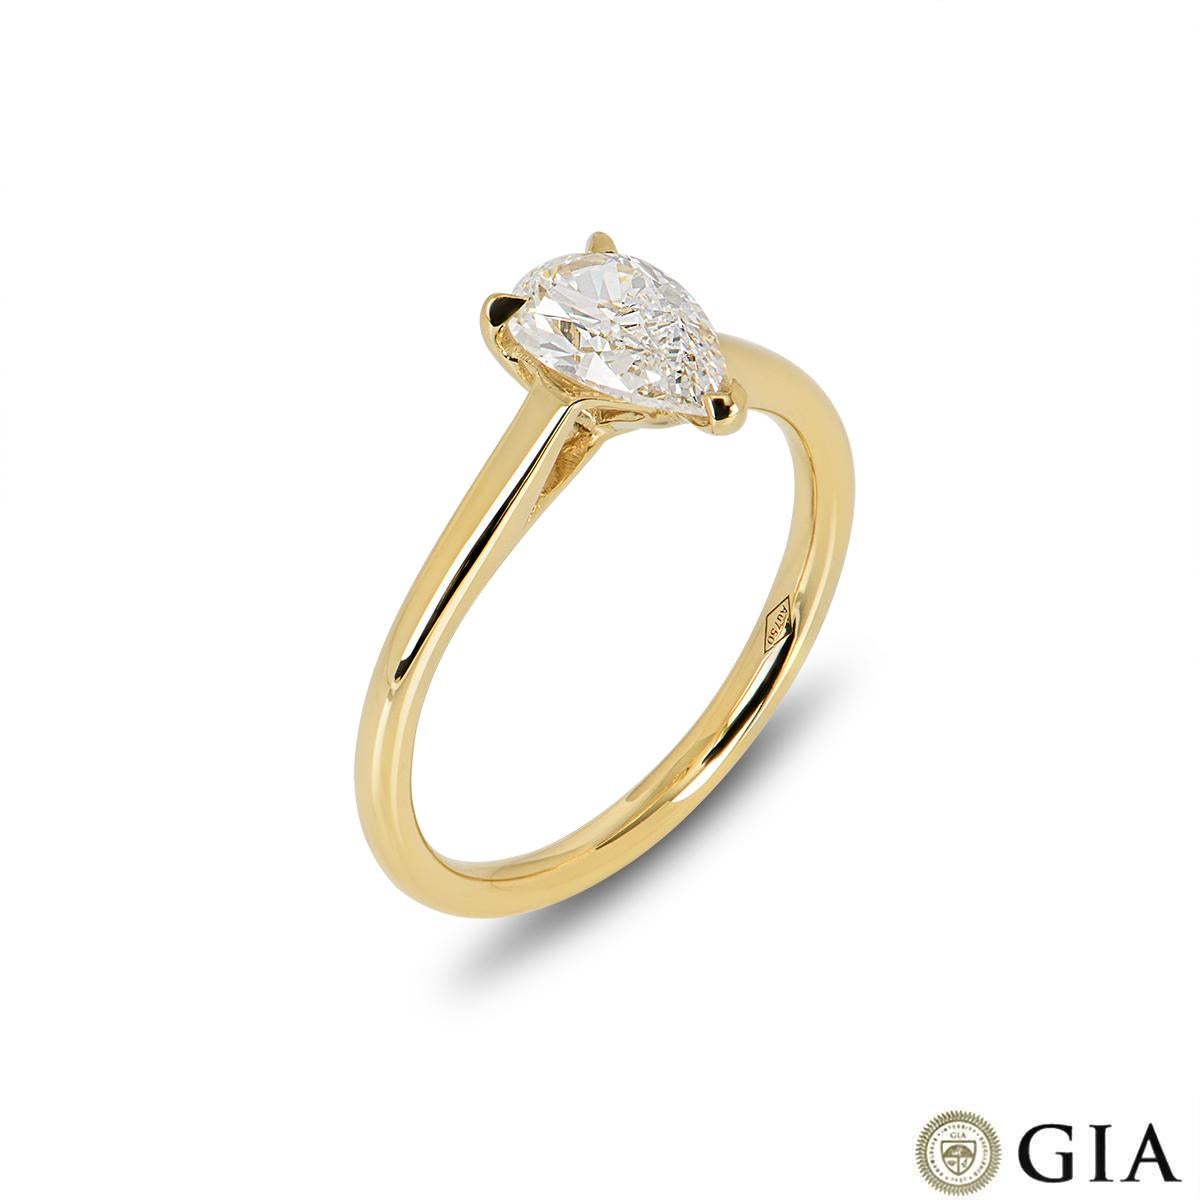 A stunning 18k yellow gold diamond engagement ring. The solitaire ring features a pear cut diamond set to the centre in a three claw mount weighing 0.90ct, F colour and VVS1 clarity. The ring has a gross weight of 2.77 grams and is currently a UK